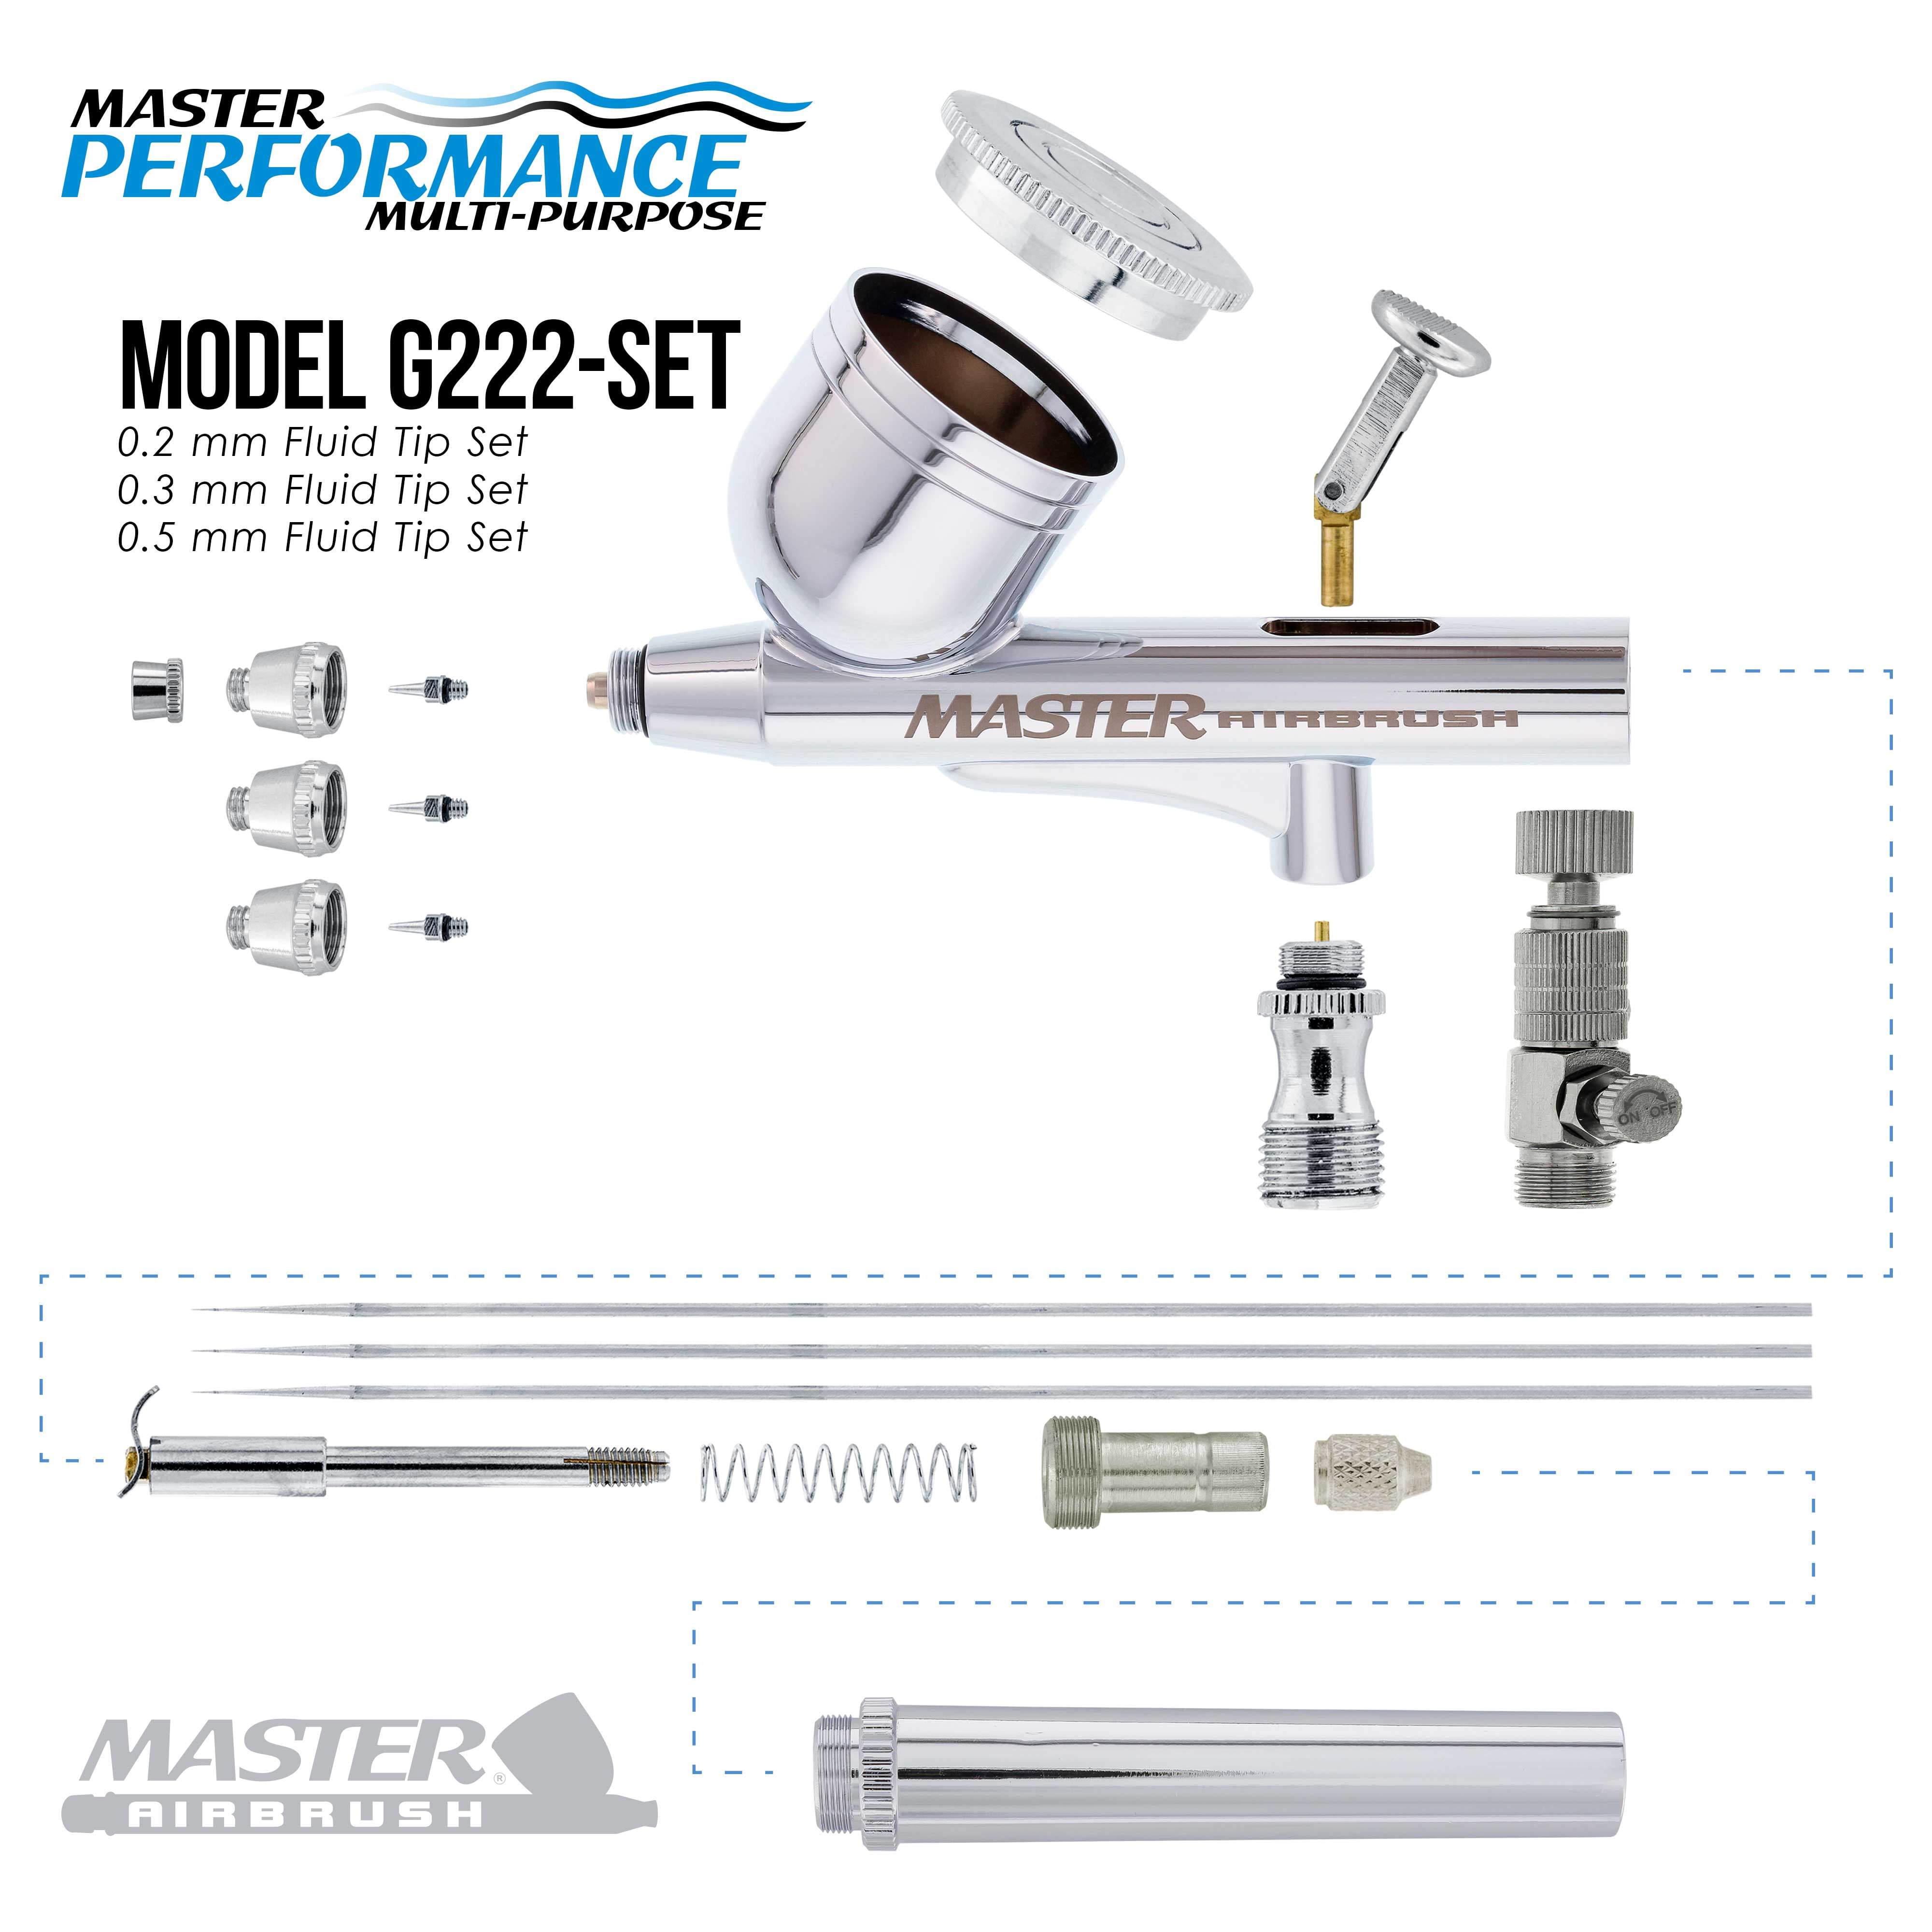 Master Airbrush Cool Runner II Dual Fan Air Compressor System Kit